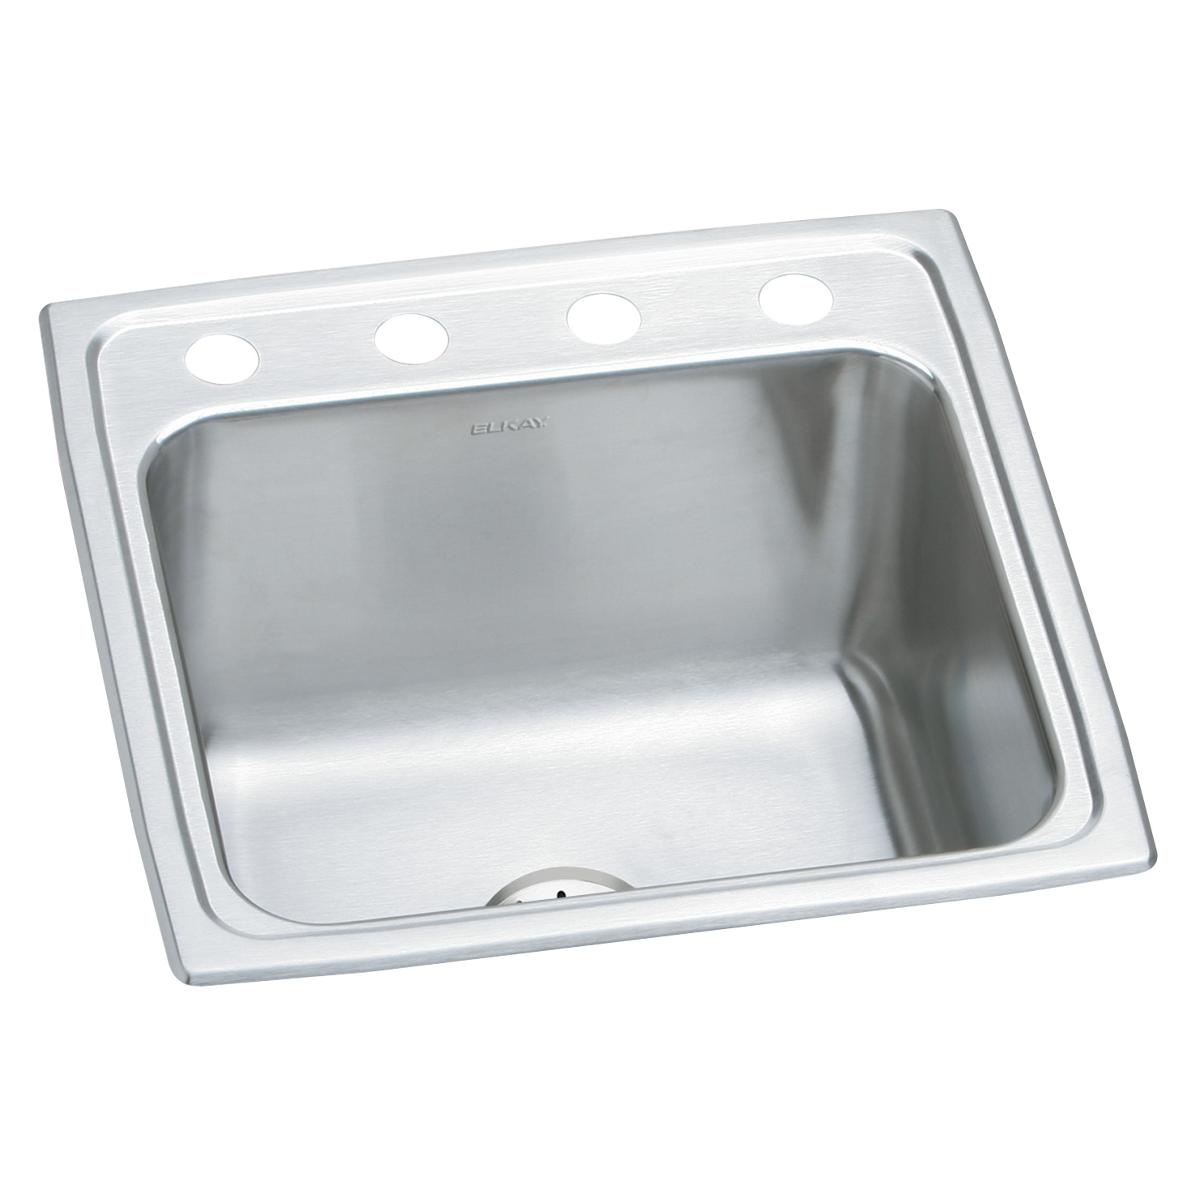 Elkay Lustertone Classic 19-1/2" x 19" x 10-1/8" OS4-Hole Single Bowl Drop-in Laundry Sink w/Perfect Drain